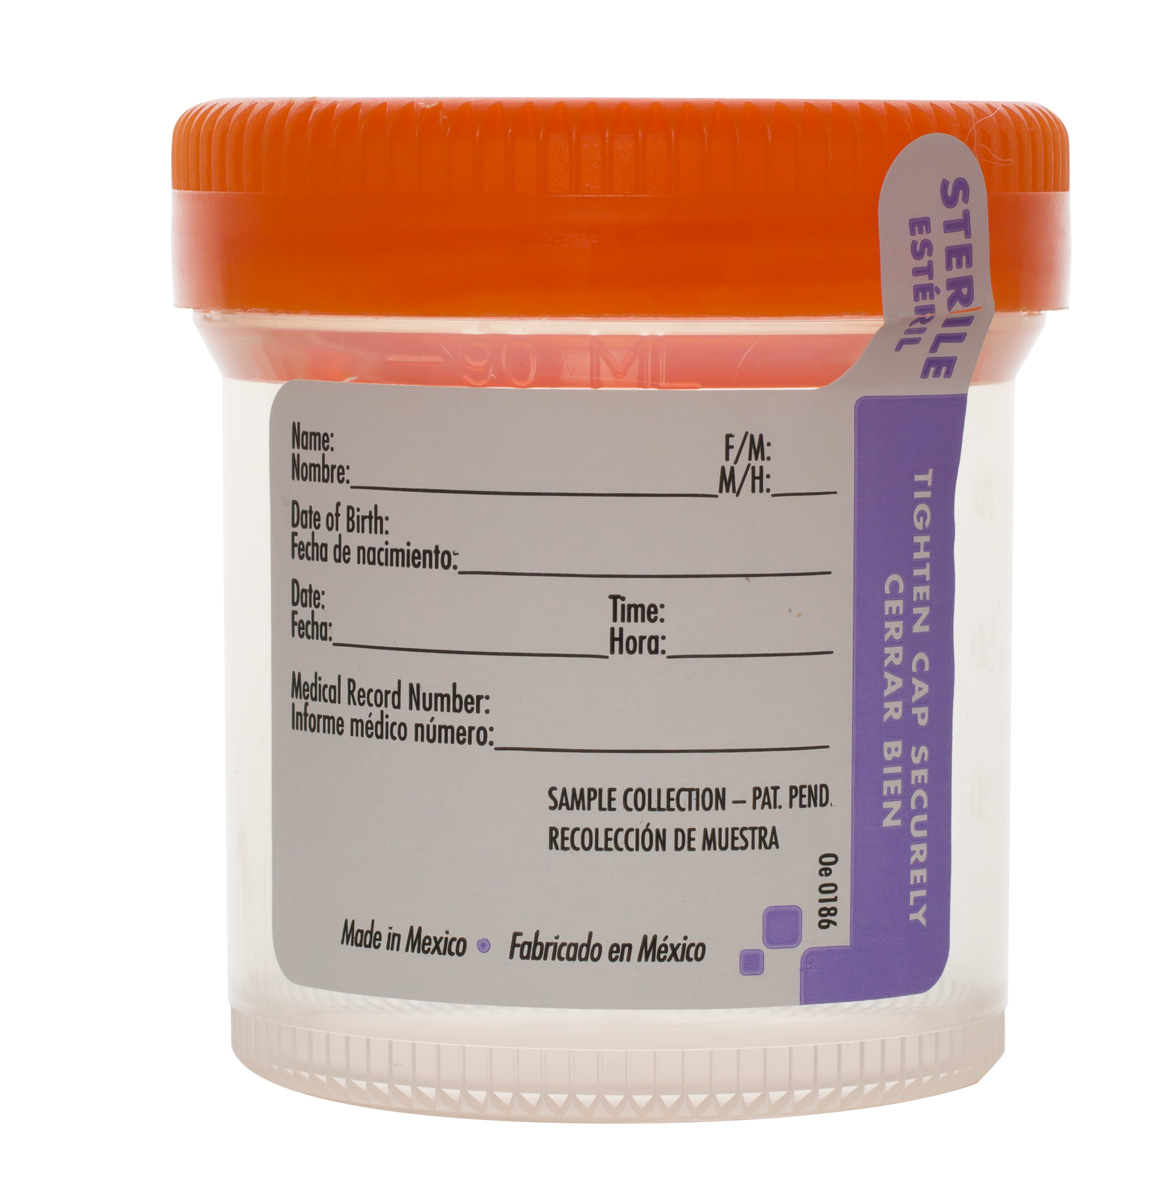 Sealed sterile container for tissue sample collection 90mL with identifying label